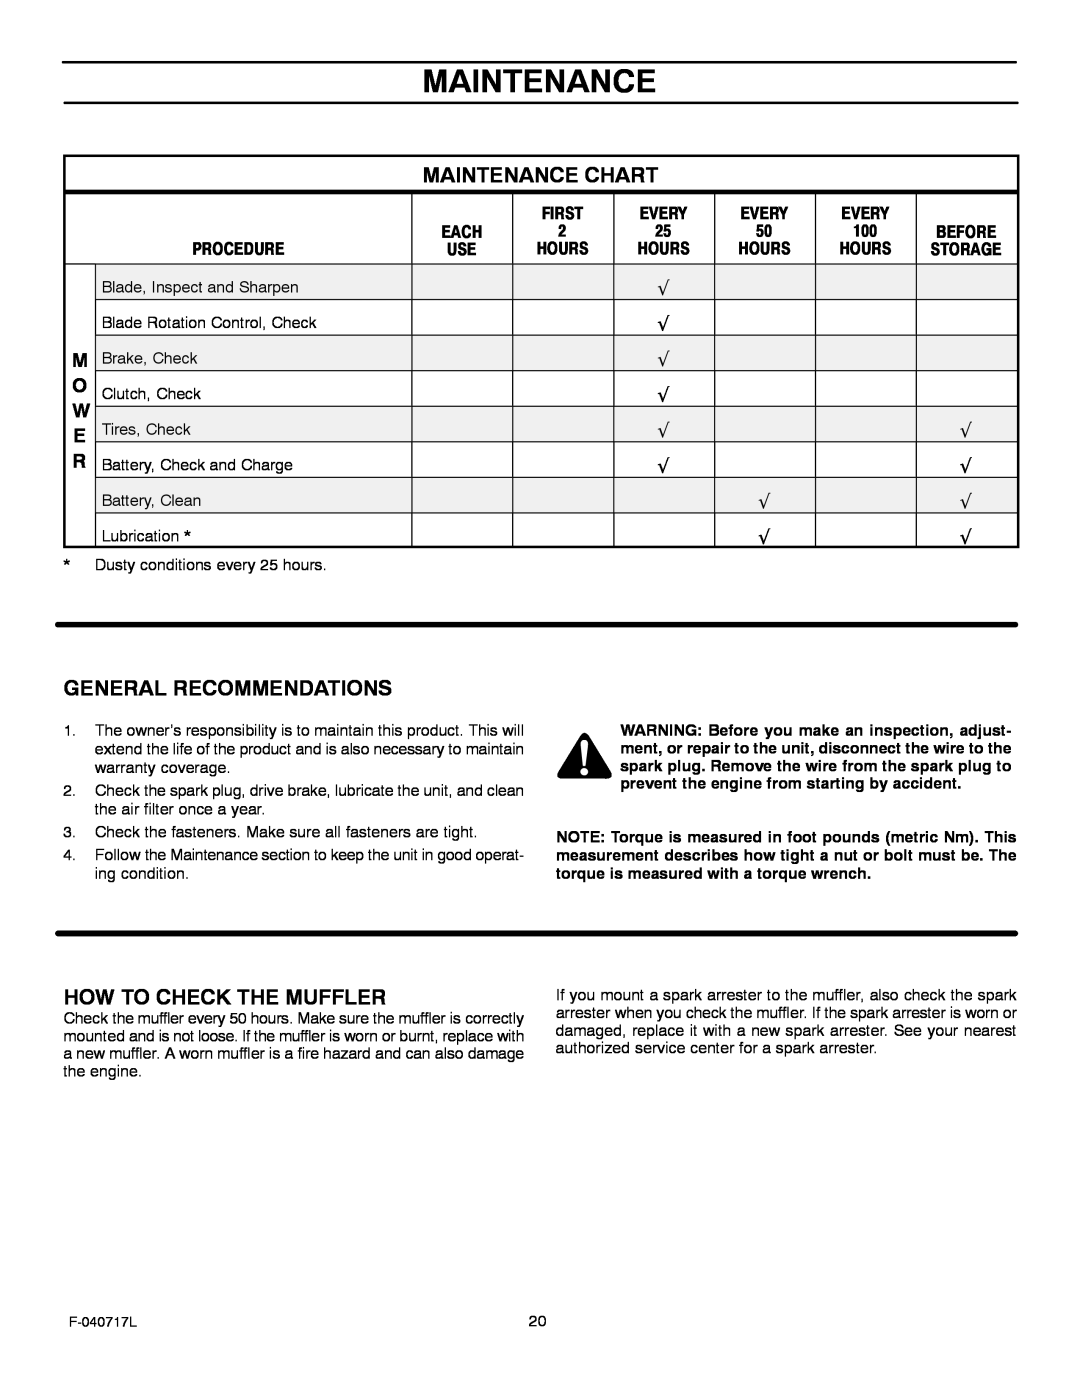 Murray 387002x92A manual Maintenance Chart, General Recommendations, How To Check The Muffler 